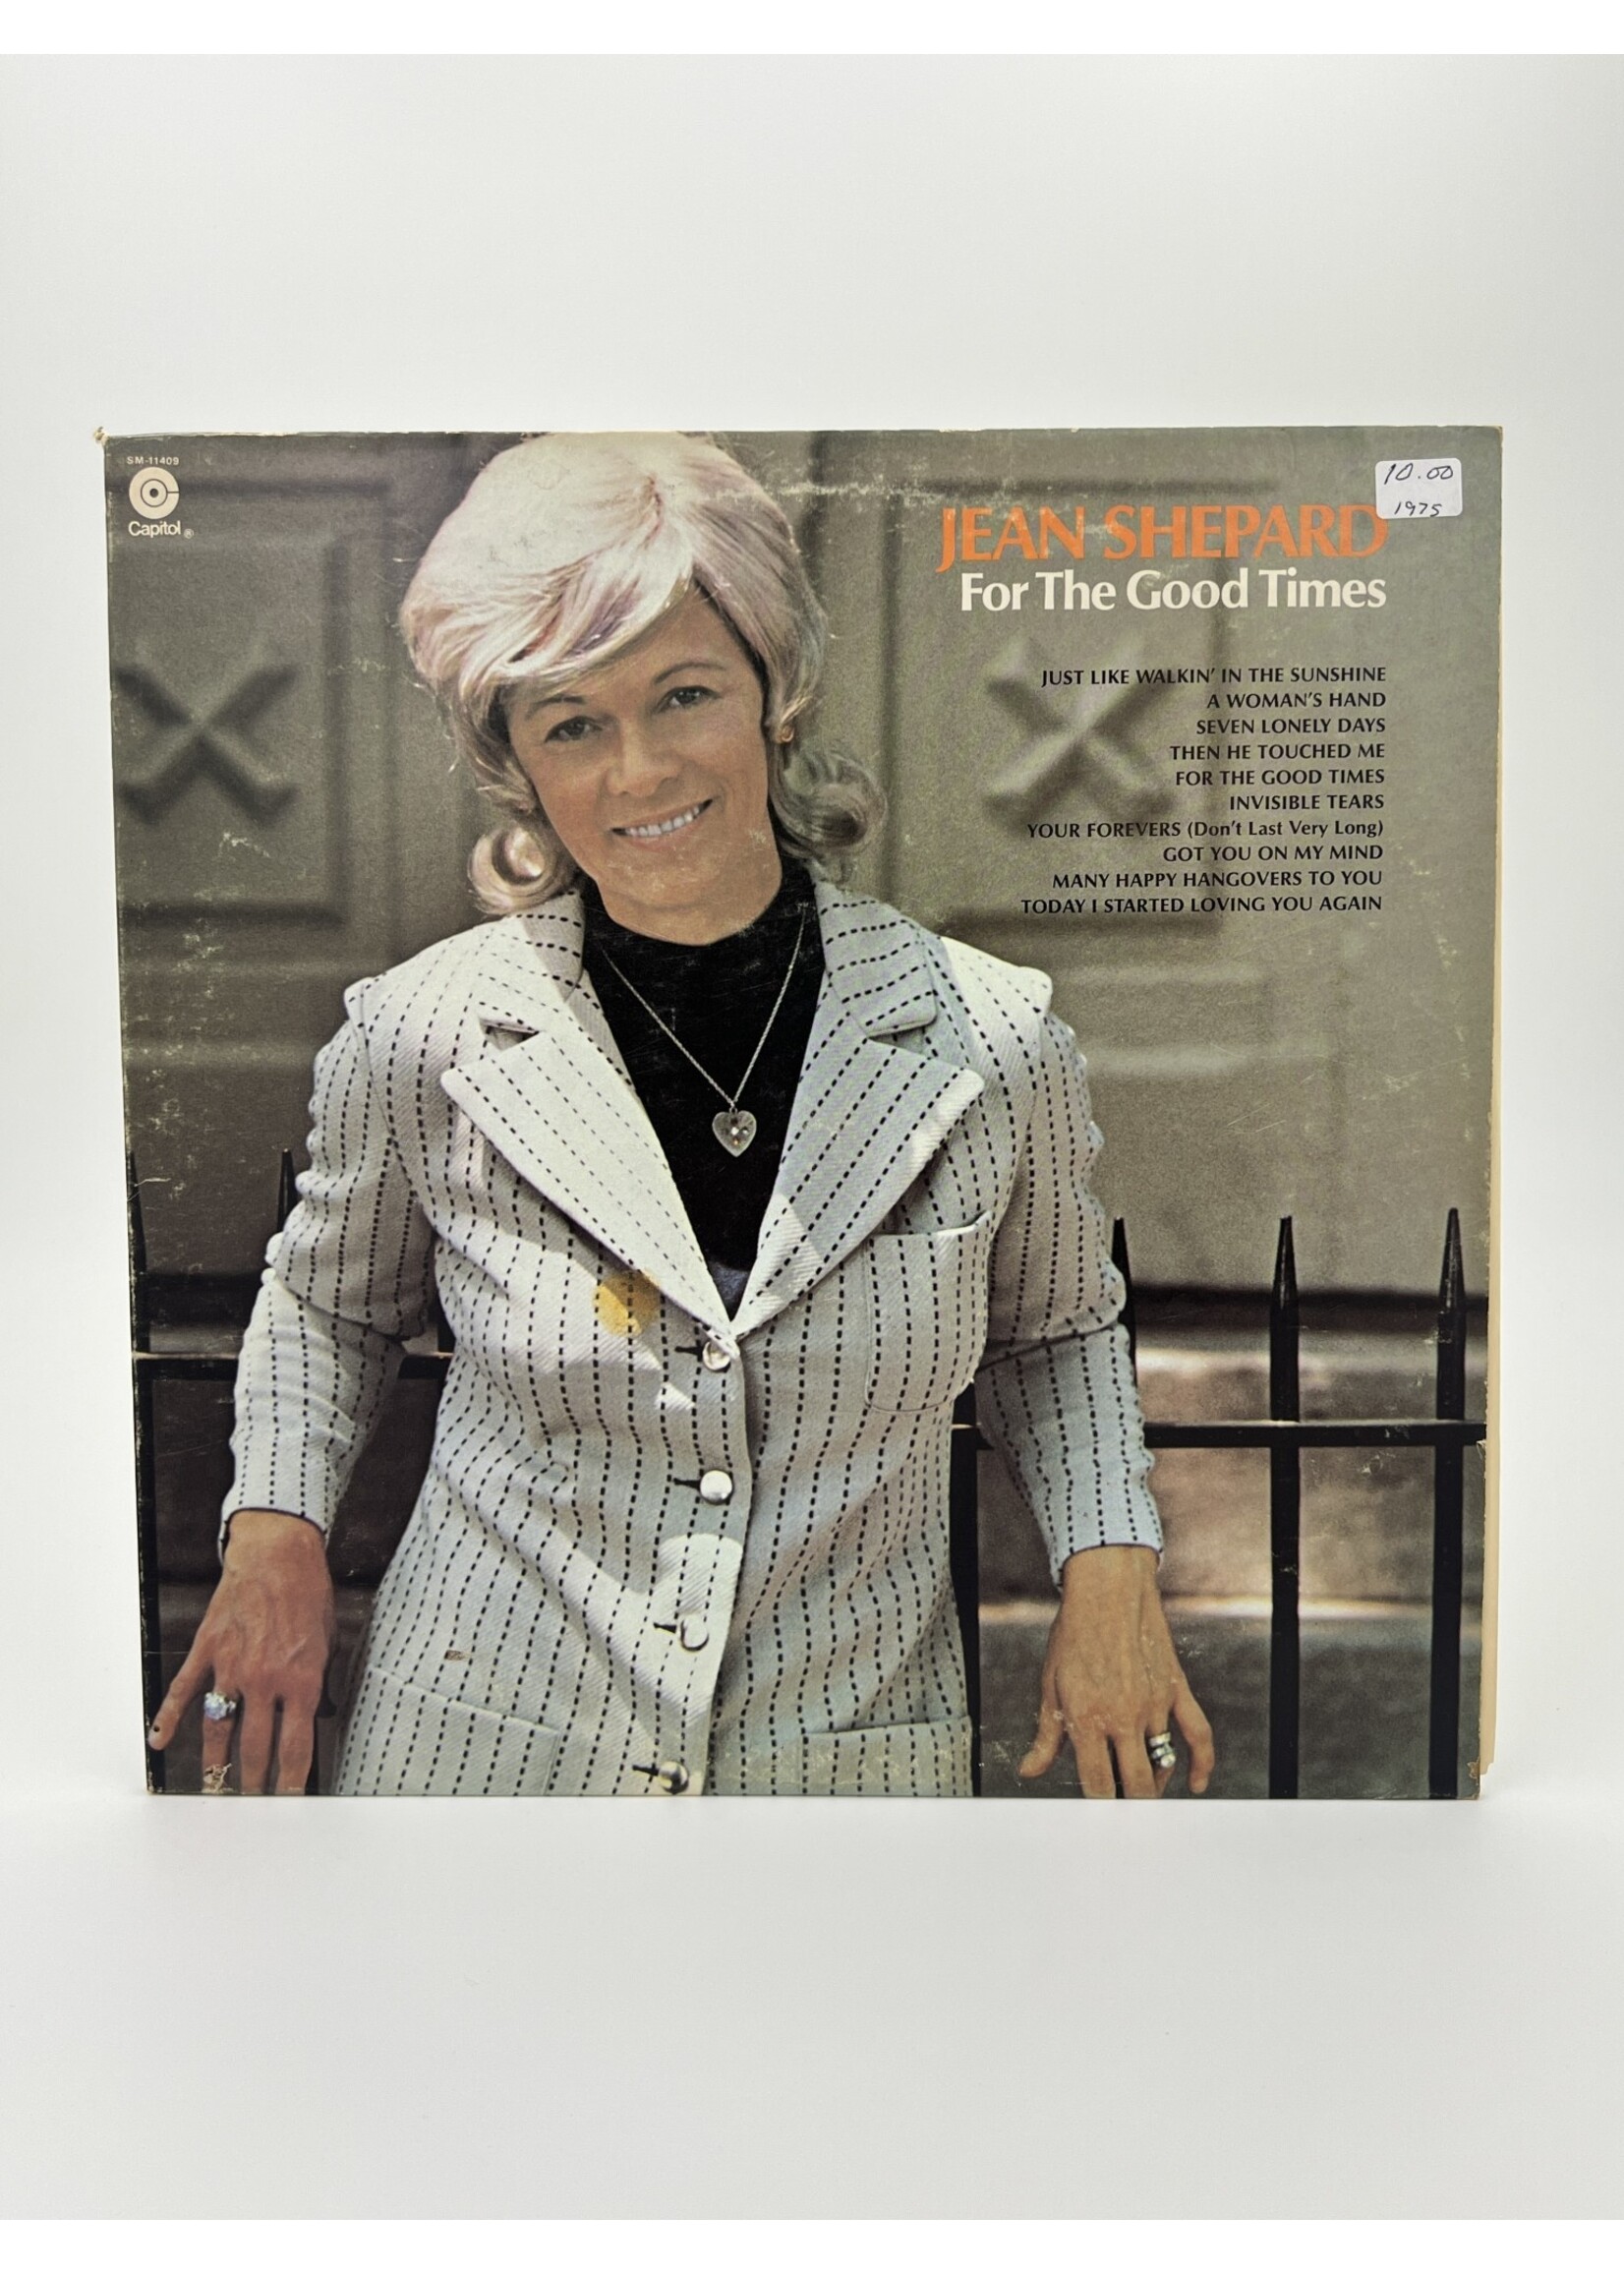 LP Jean Shepard For The Good Times LP Record